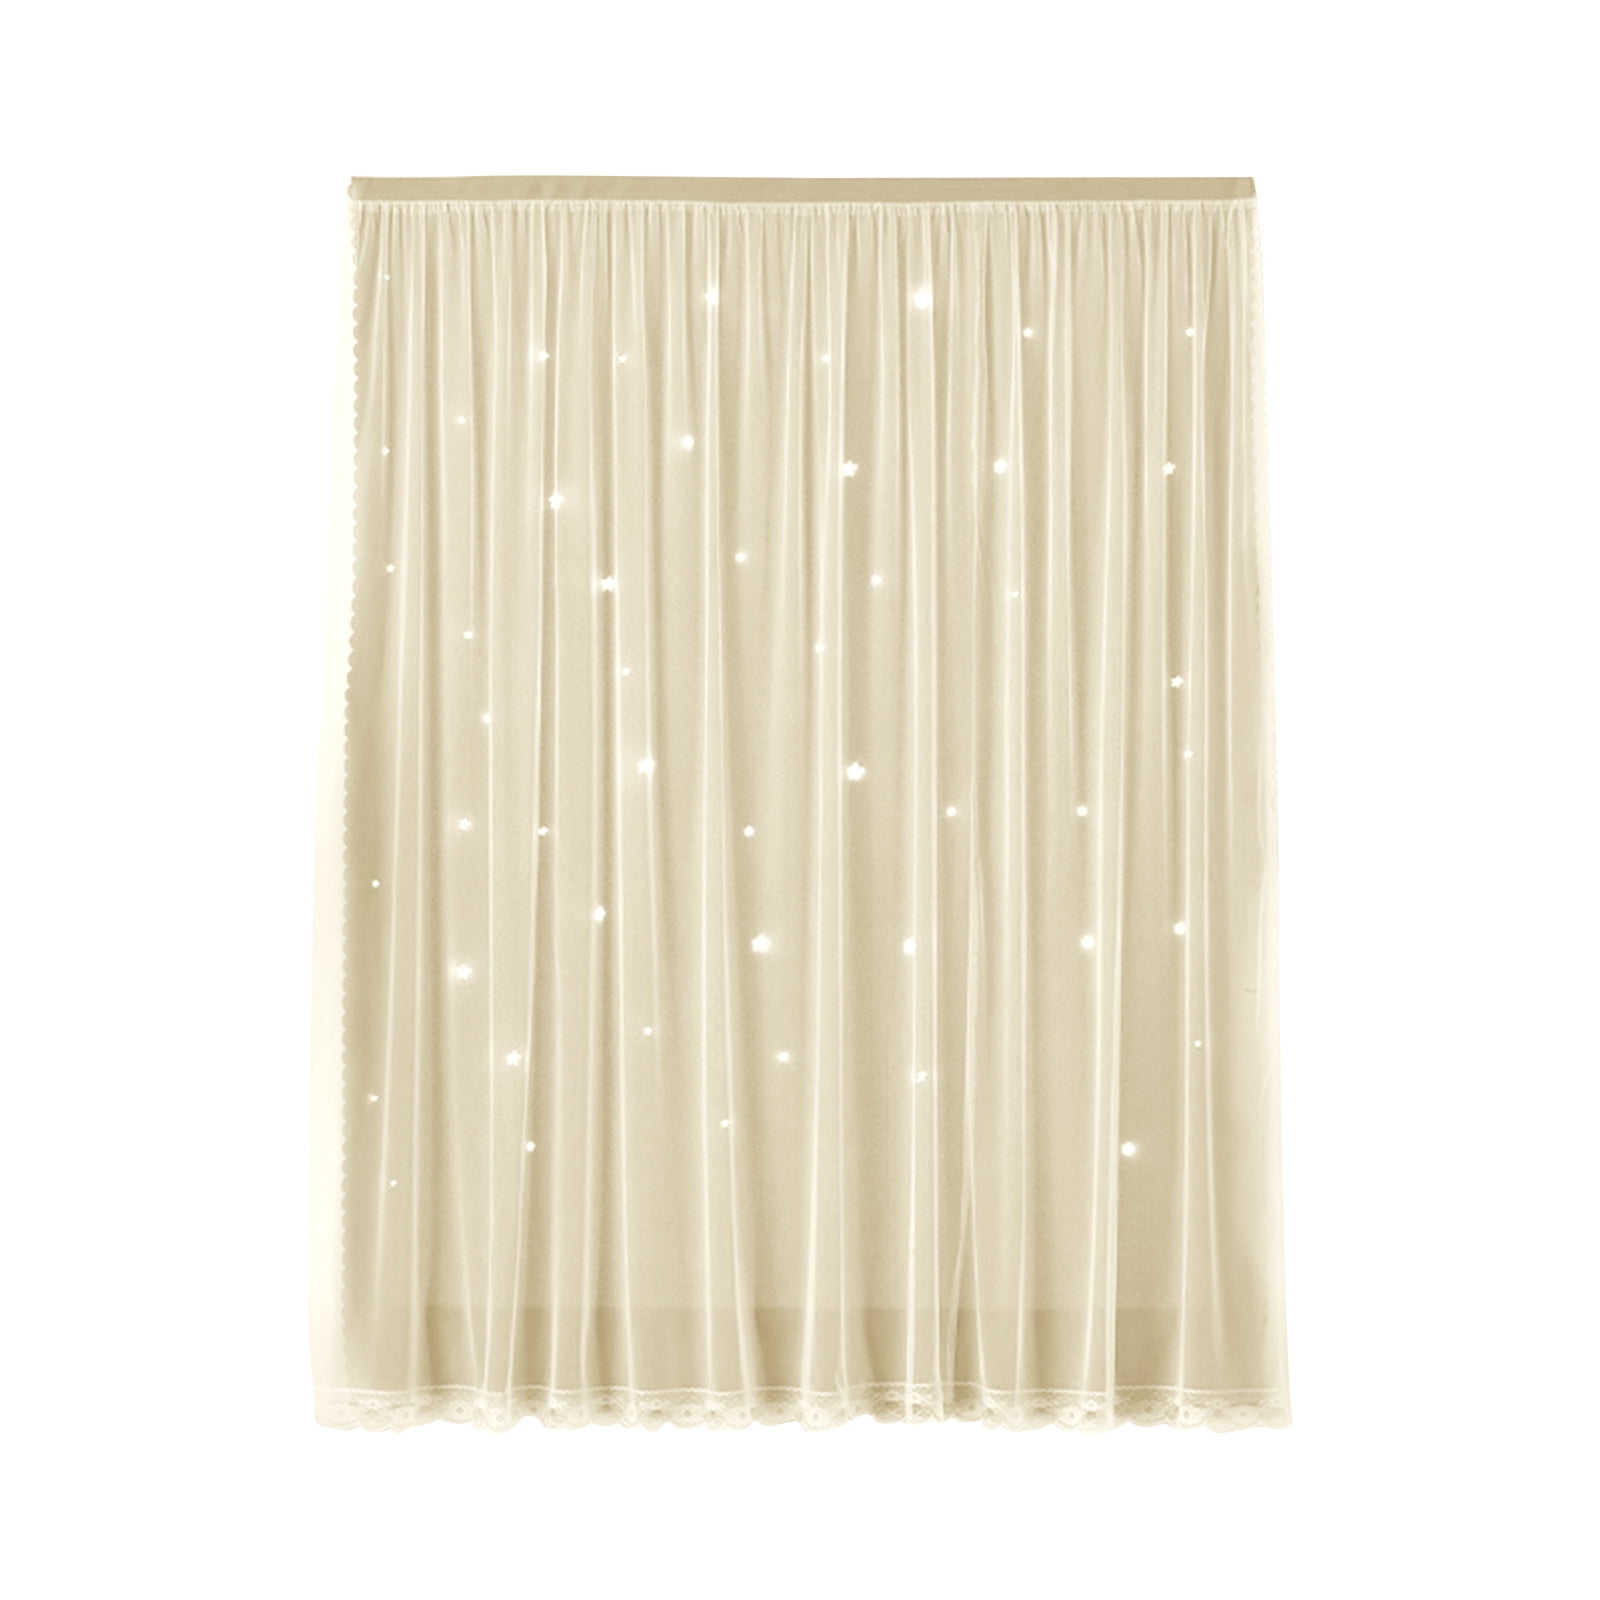 Curtains Velcro Curtains Blackout Curtains Self-Adhesive Finished Products Magic Curtains 1pcs, Size: 39.37 x 78.74, Beige